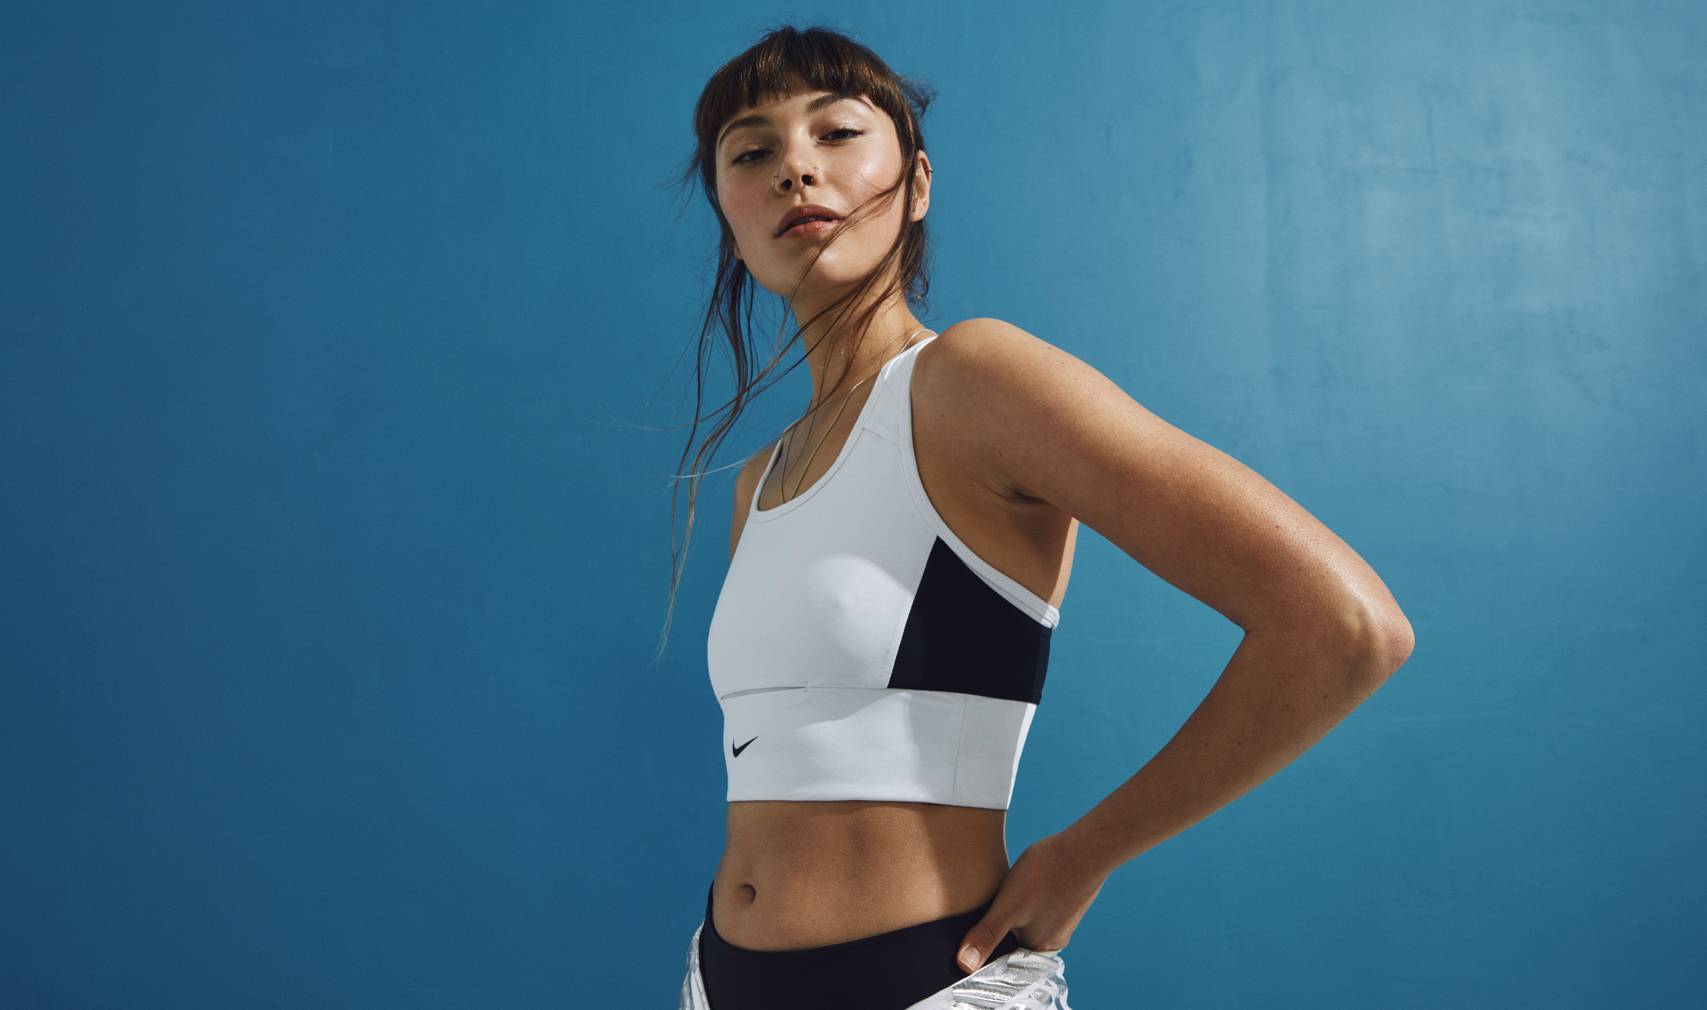 NIKE Spring 2018 Bra Collection Campaign